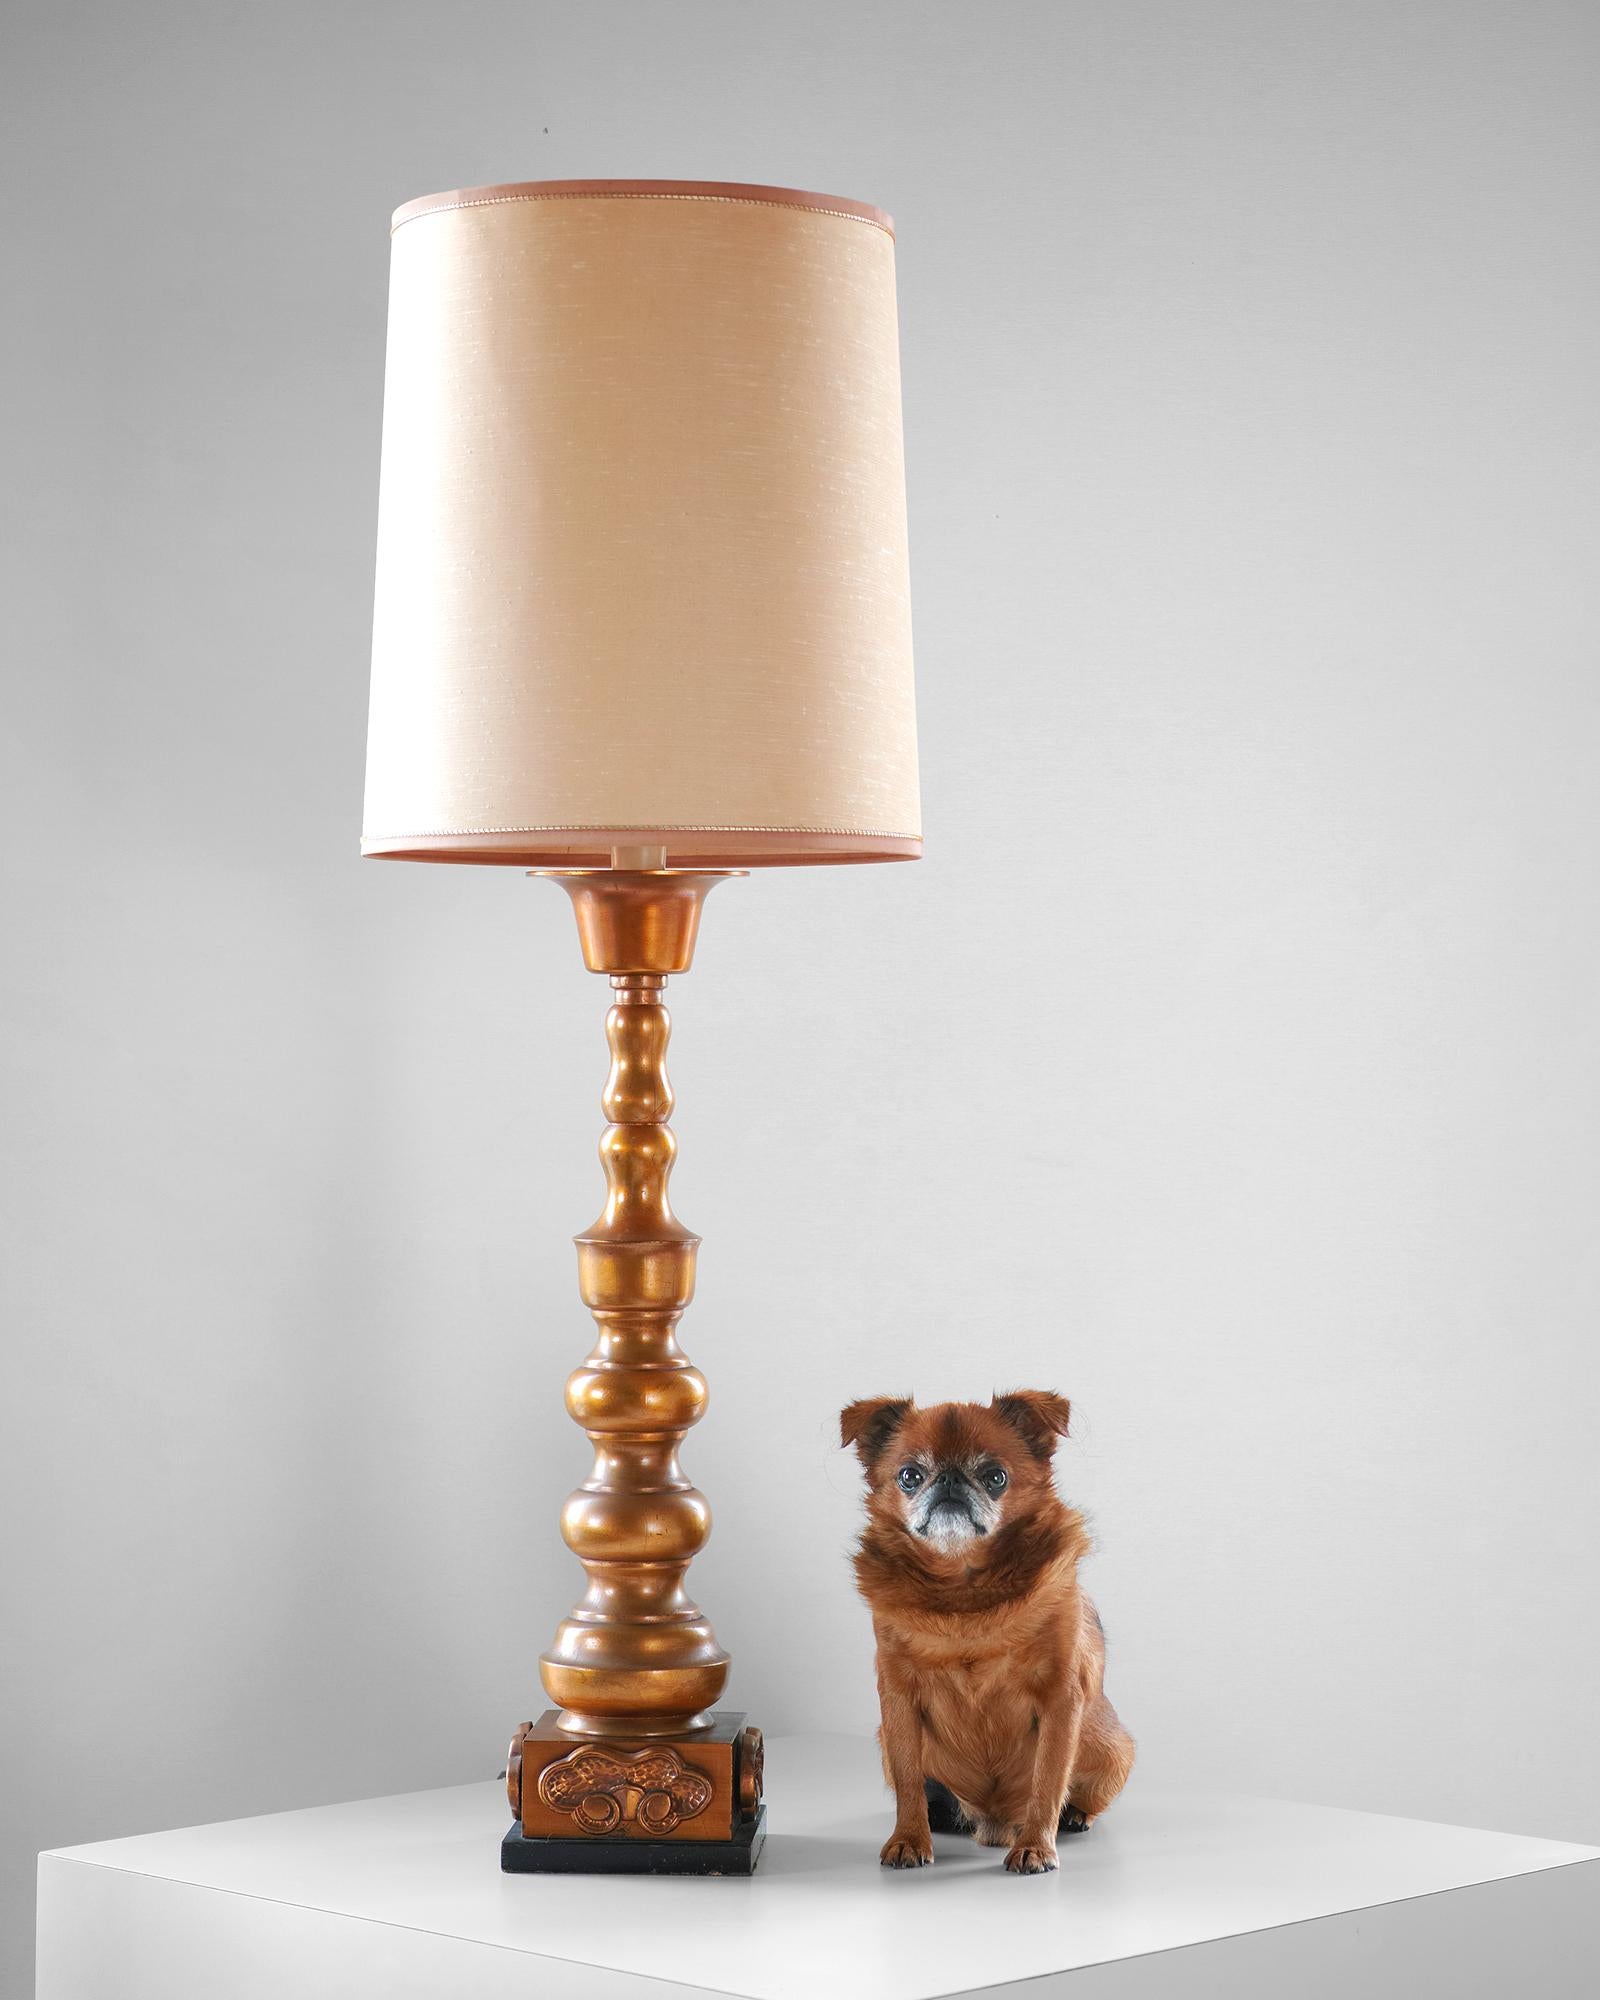 For your consideration is this gilt Chinoiserie lamp by Marbro manufactured in the 1960s. It features the original fabric shade, baluster form base with original gilt finish. At the top of the baluster is a contrasting, flared, ivory-tone element.